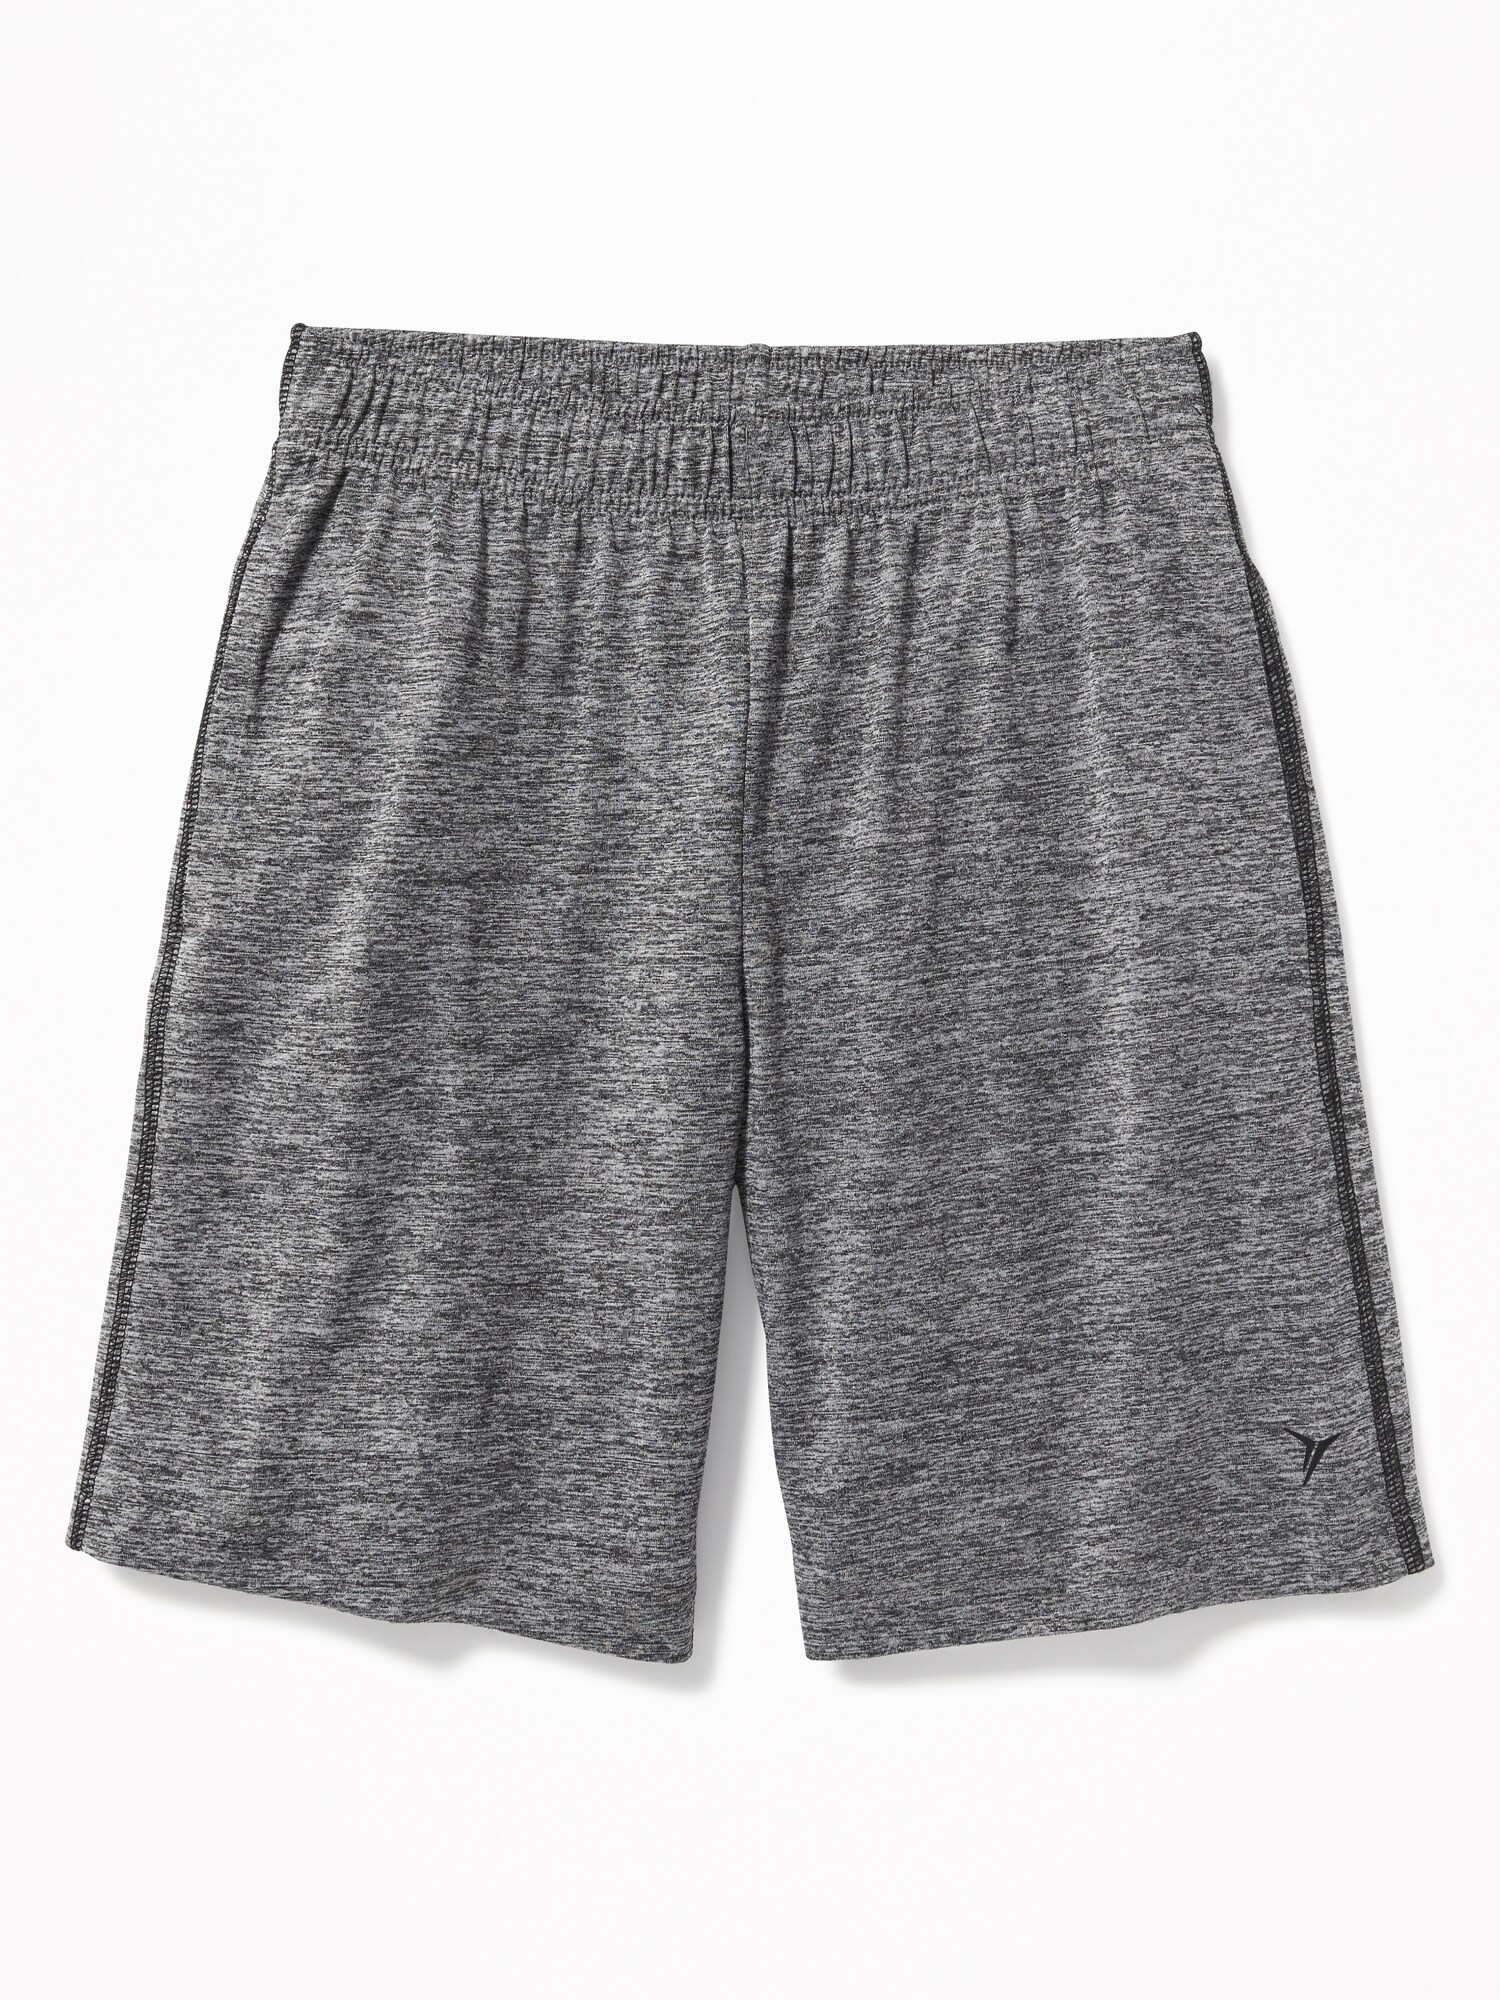 Space-Dye Jersey Performance Shorts for Boys | Old Navy